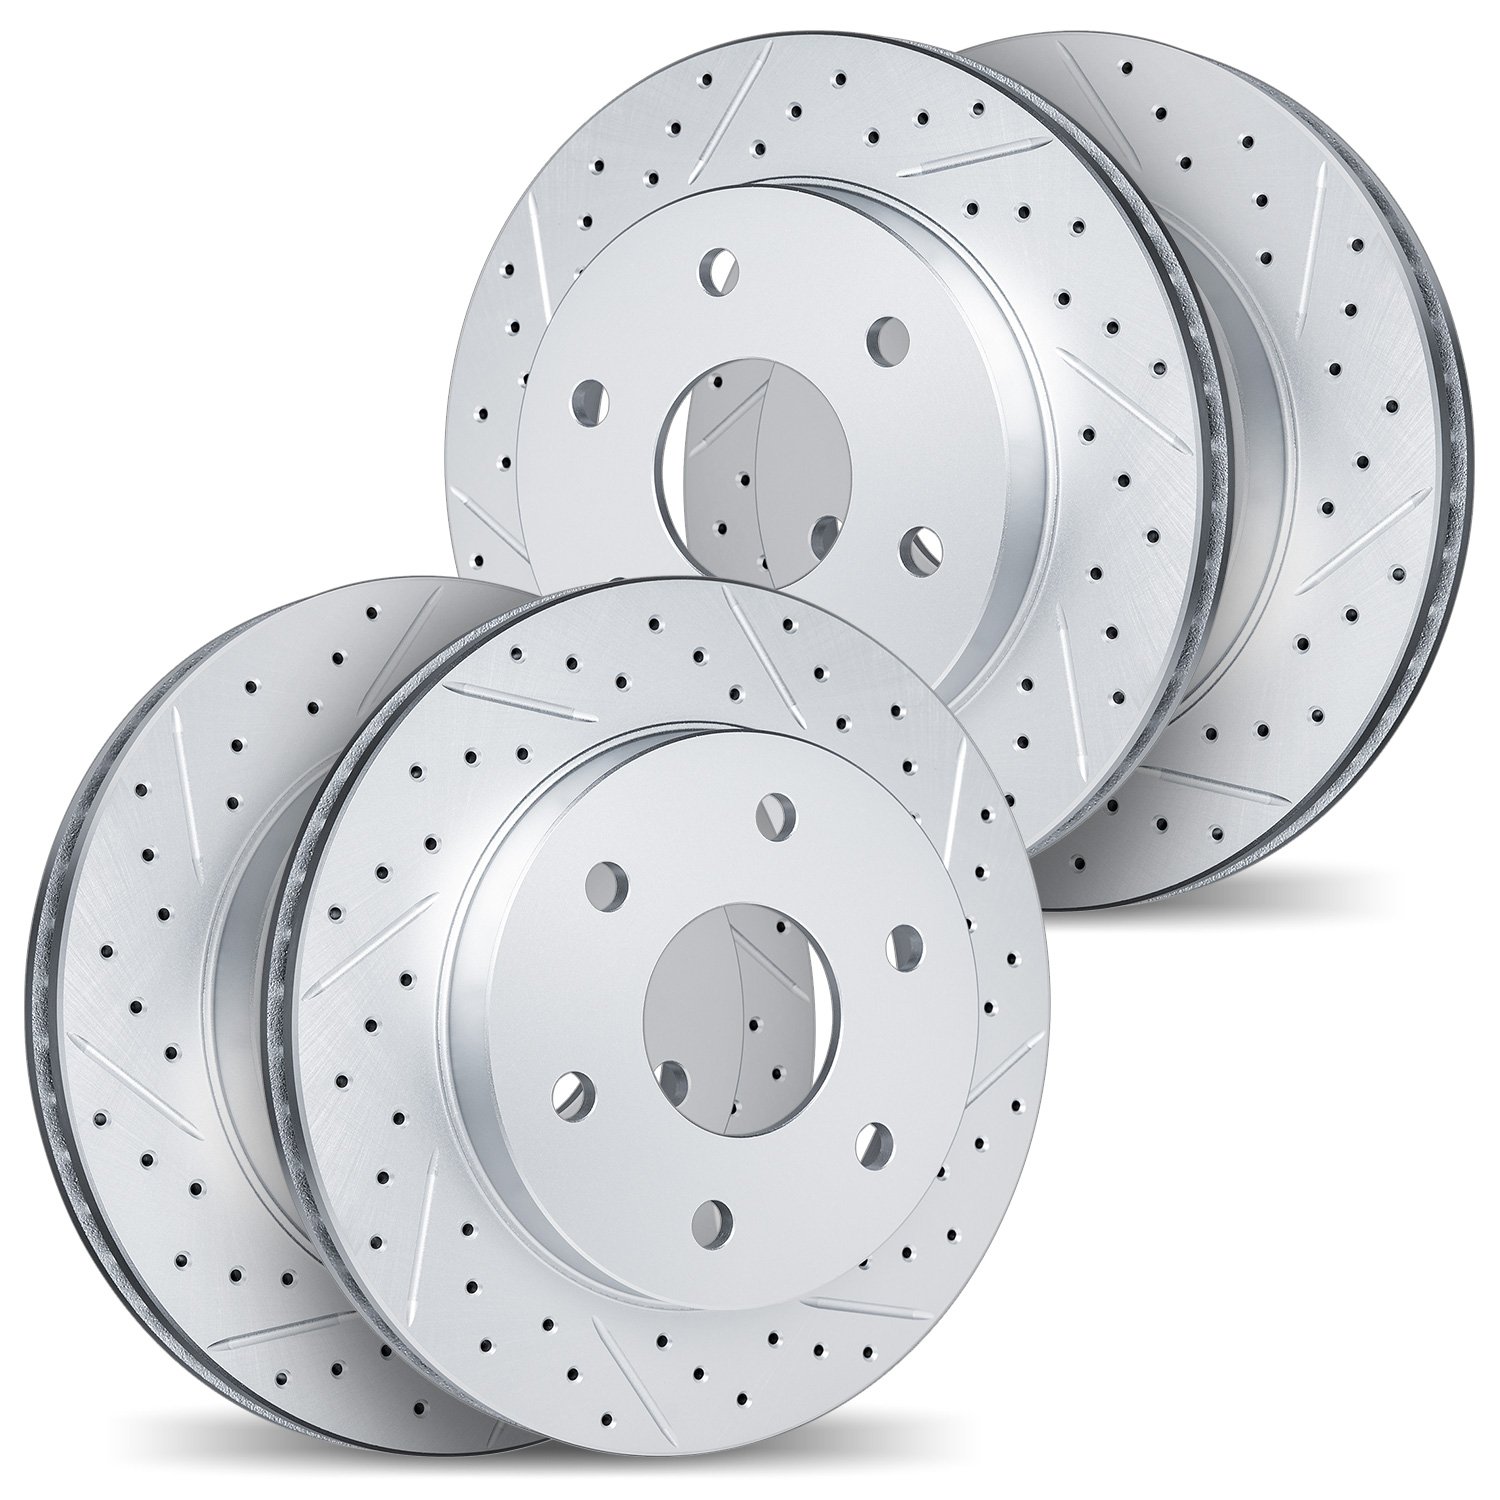 2004-40033 Geoperformance Drilled/Slotted Brake Rotors, 2003-2003 Mopar, Position: Front and Rear